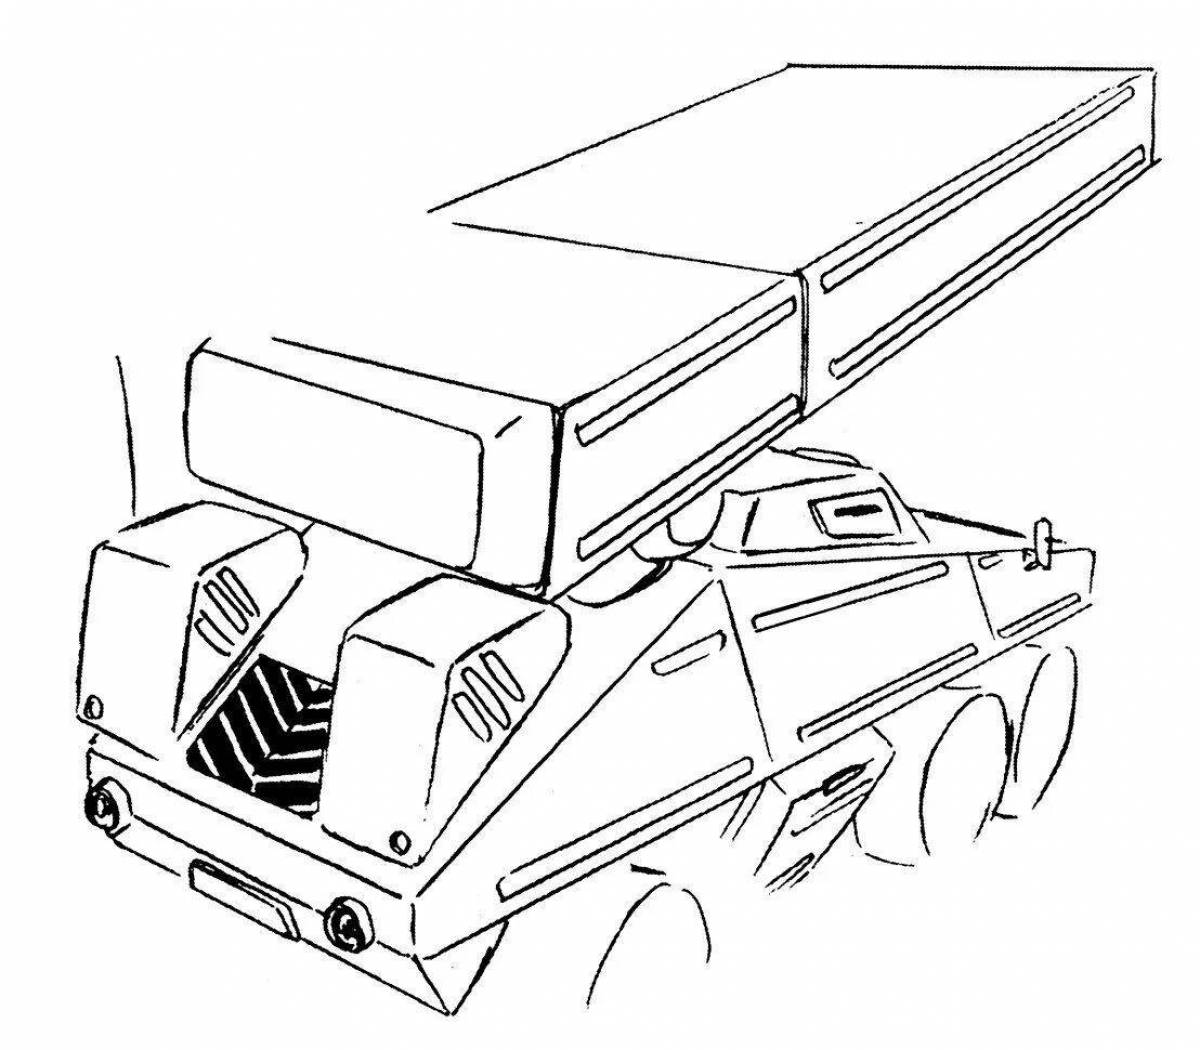 Colorful katyusha military vehicle coloring page for kids